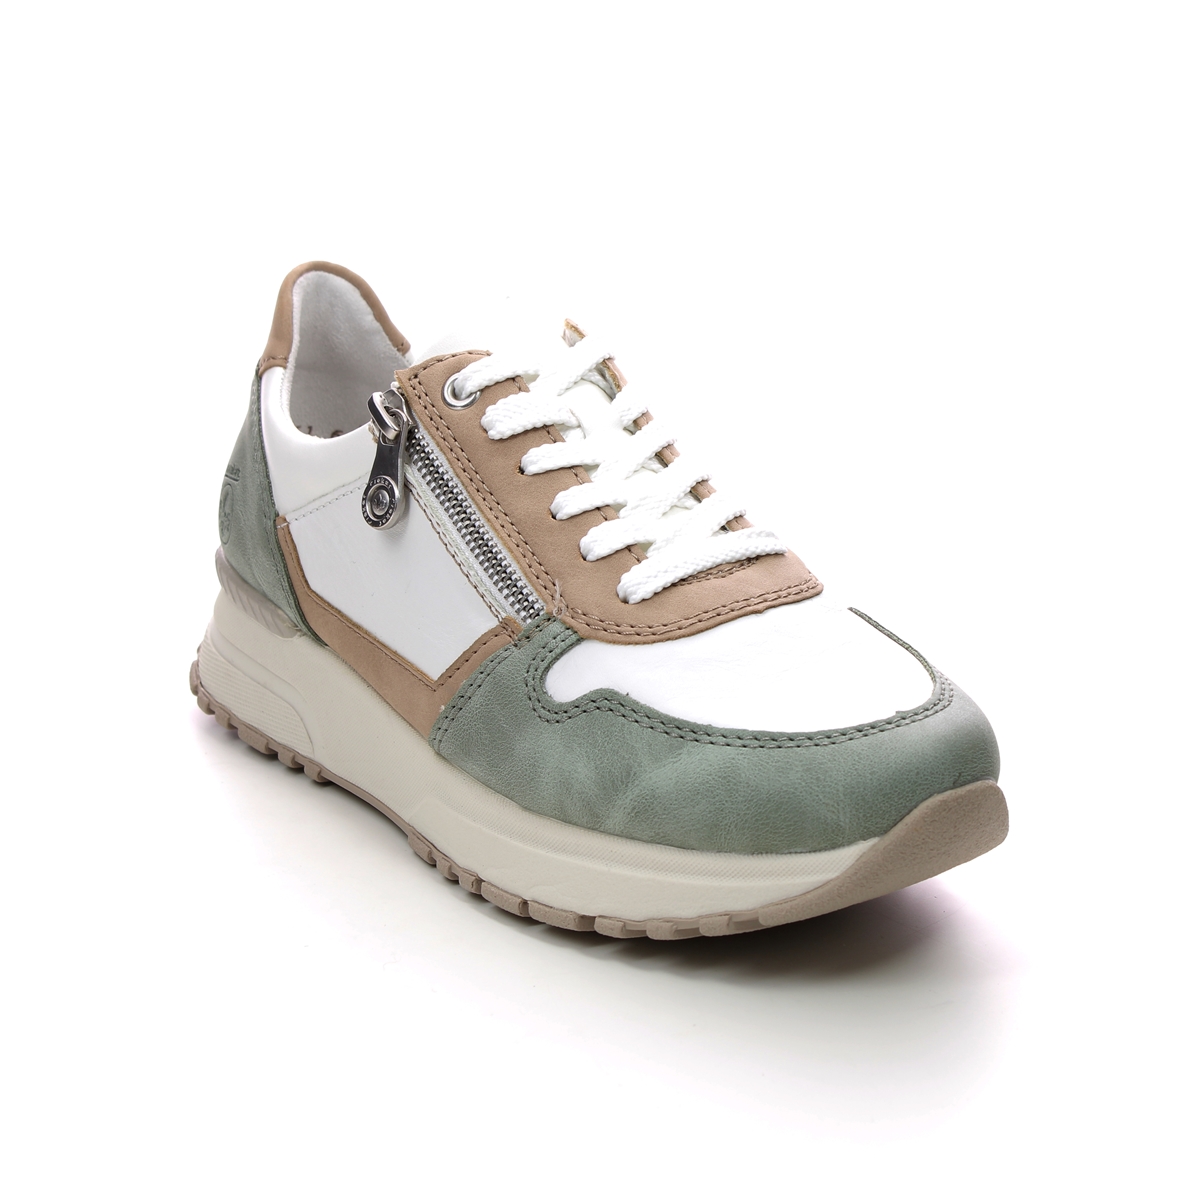 Rieker N7422-80 Sage Womens trainers in a Plain Man-made in Size 40